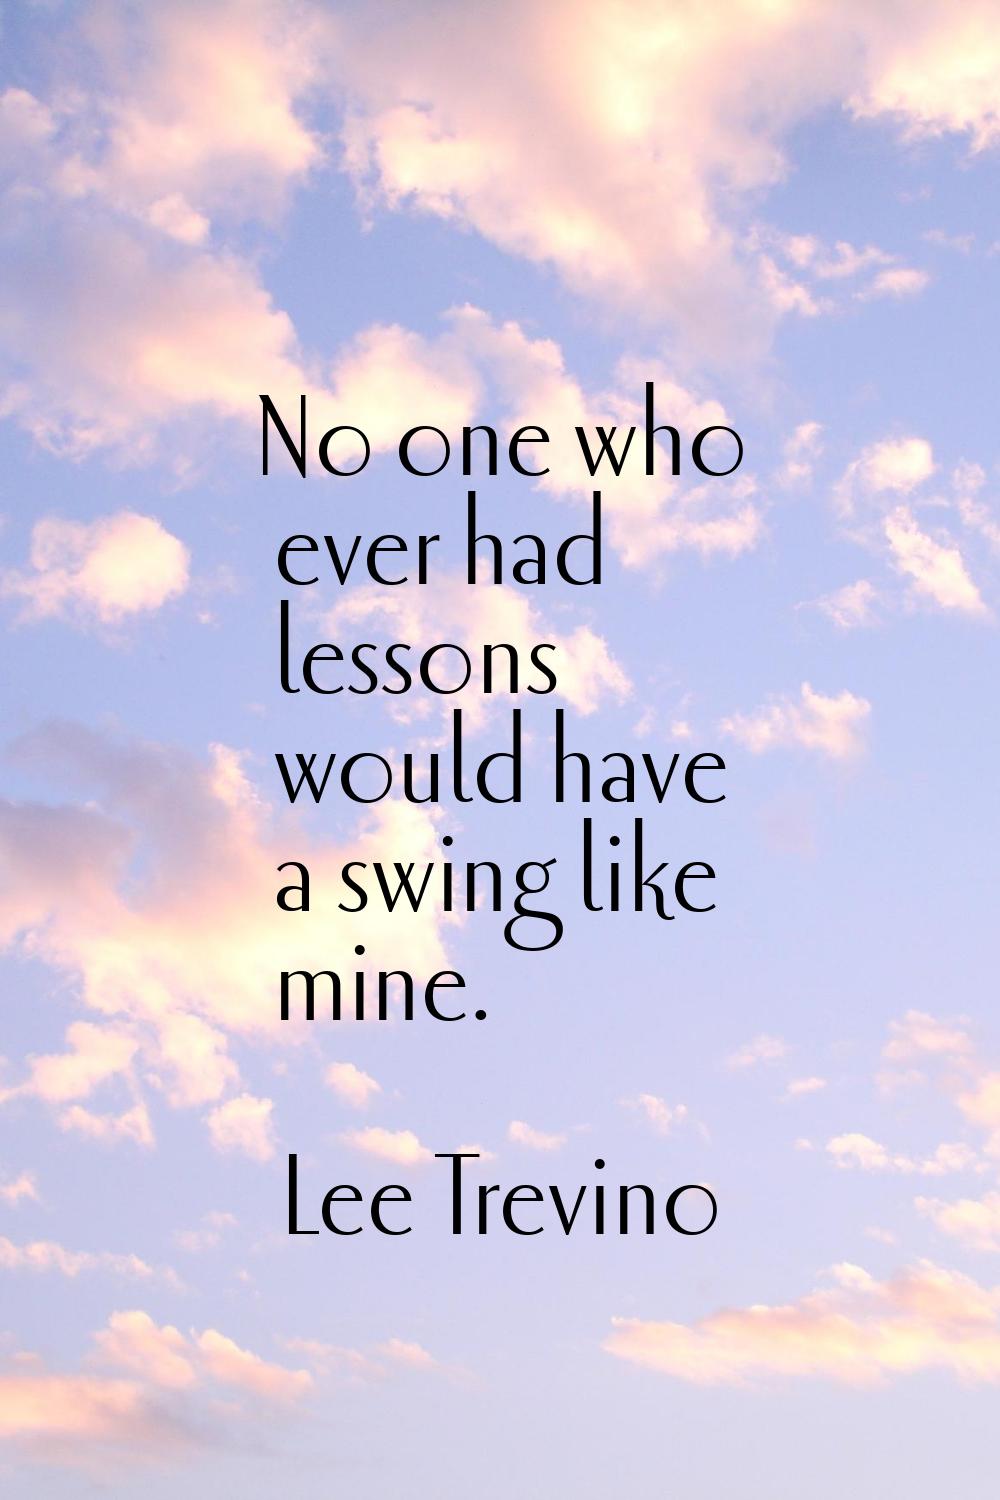 No one who ever had lessons would have a swing like mine.